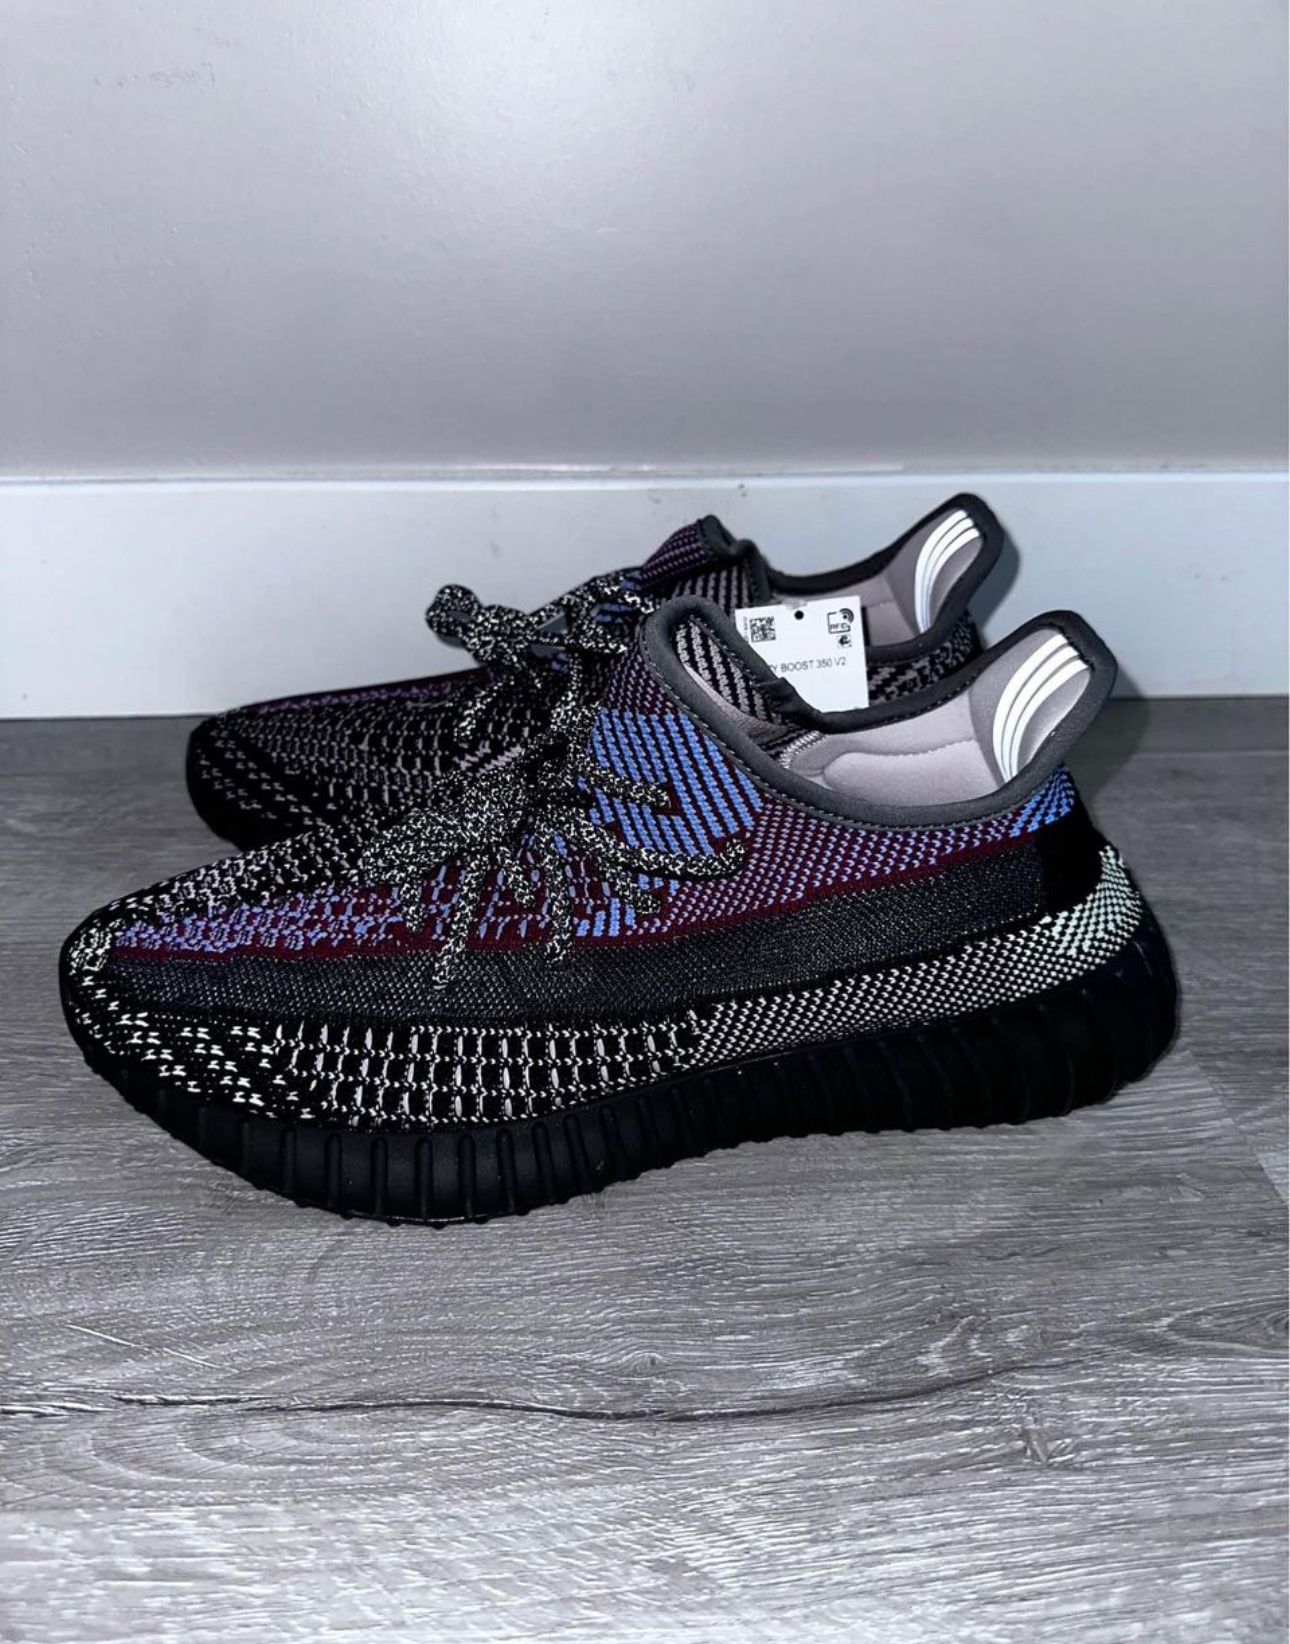 Adidas Yeezy Boost 350 V2 Yecheil (Reflective) Shoes